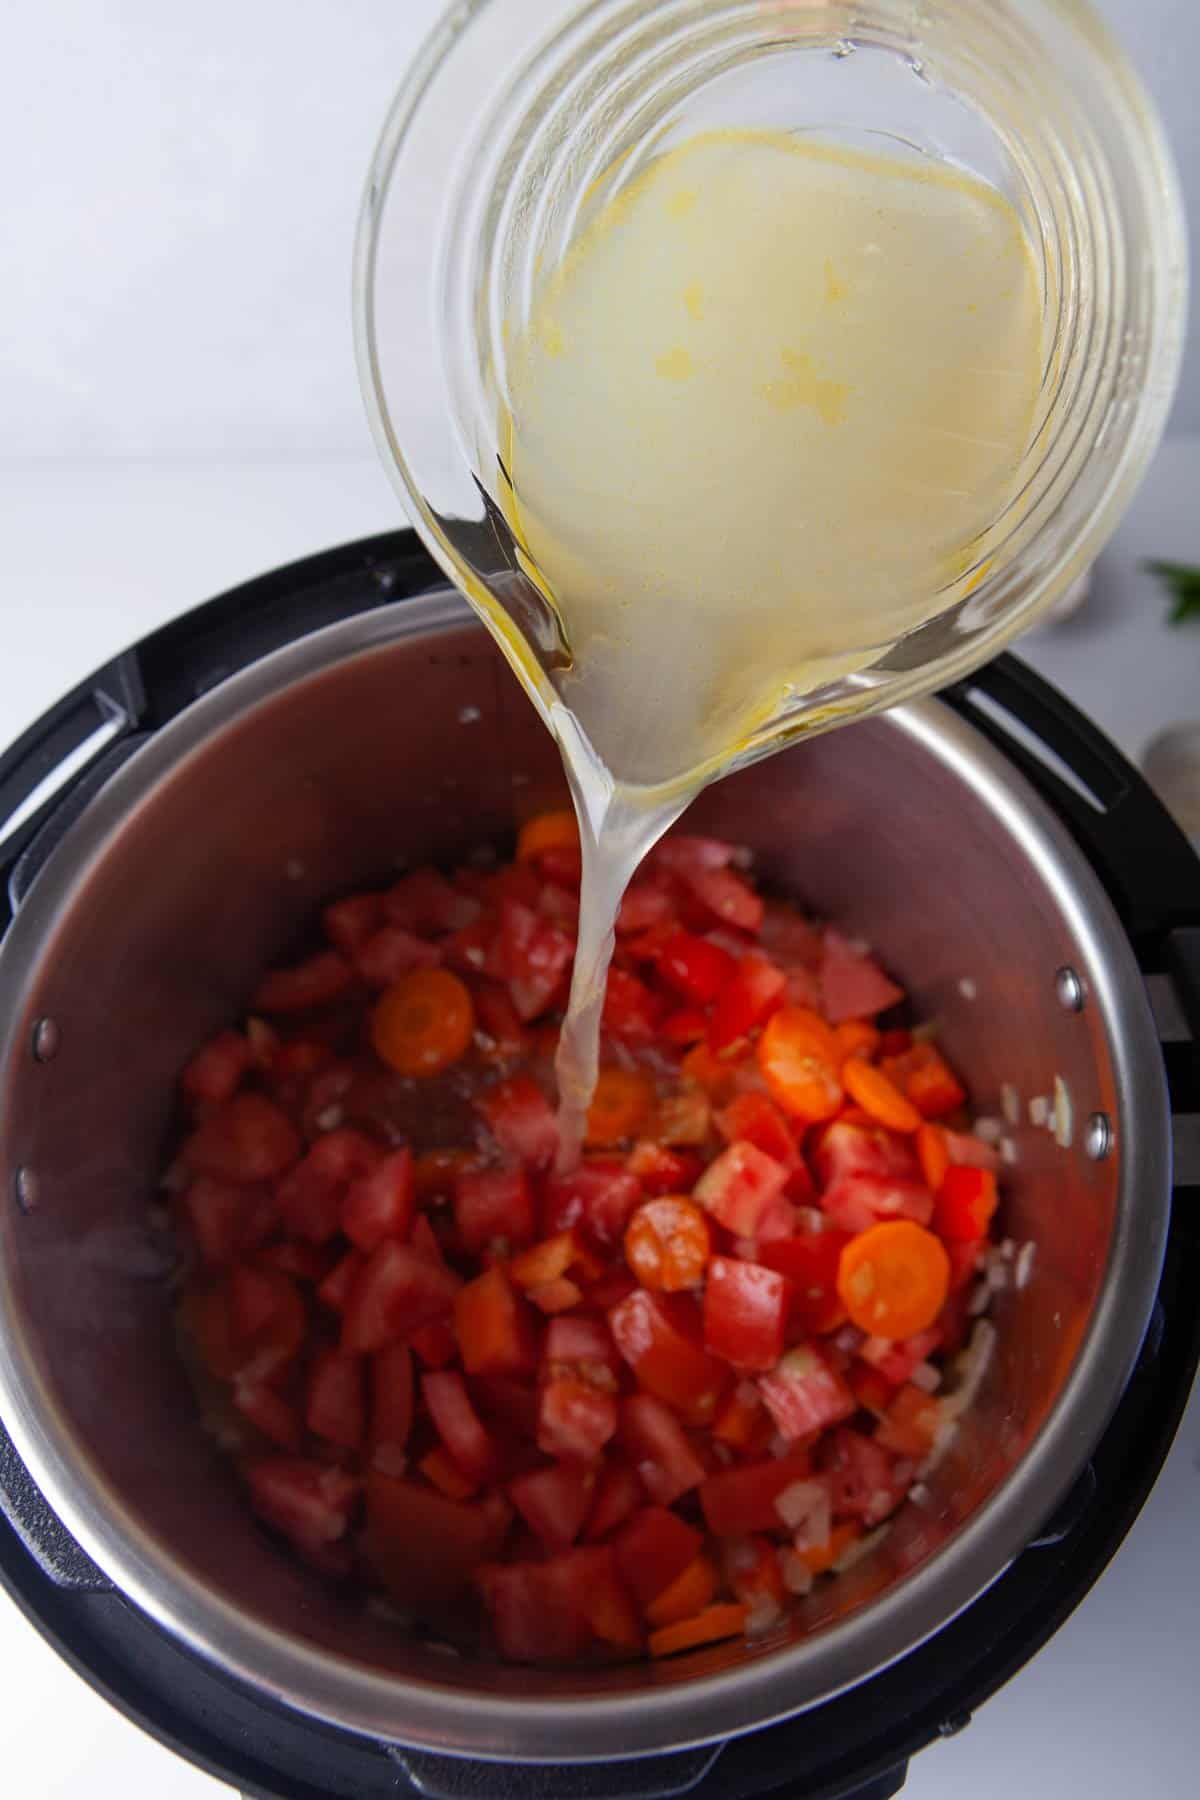 Adding chicken broth to diced tomatoes, carrots and onions in an Instant Pot.